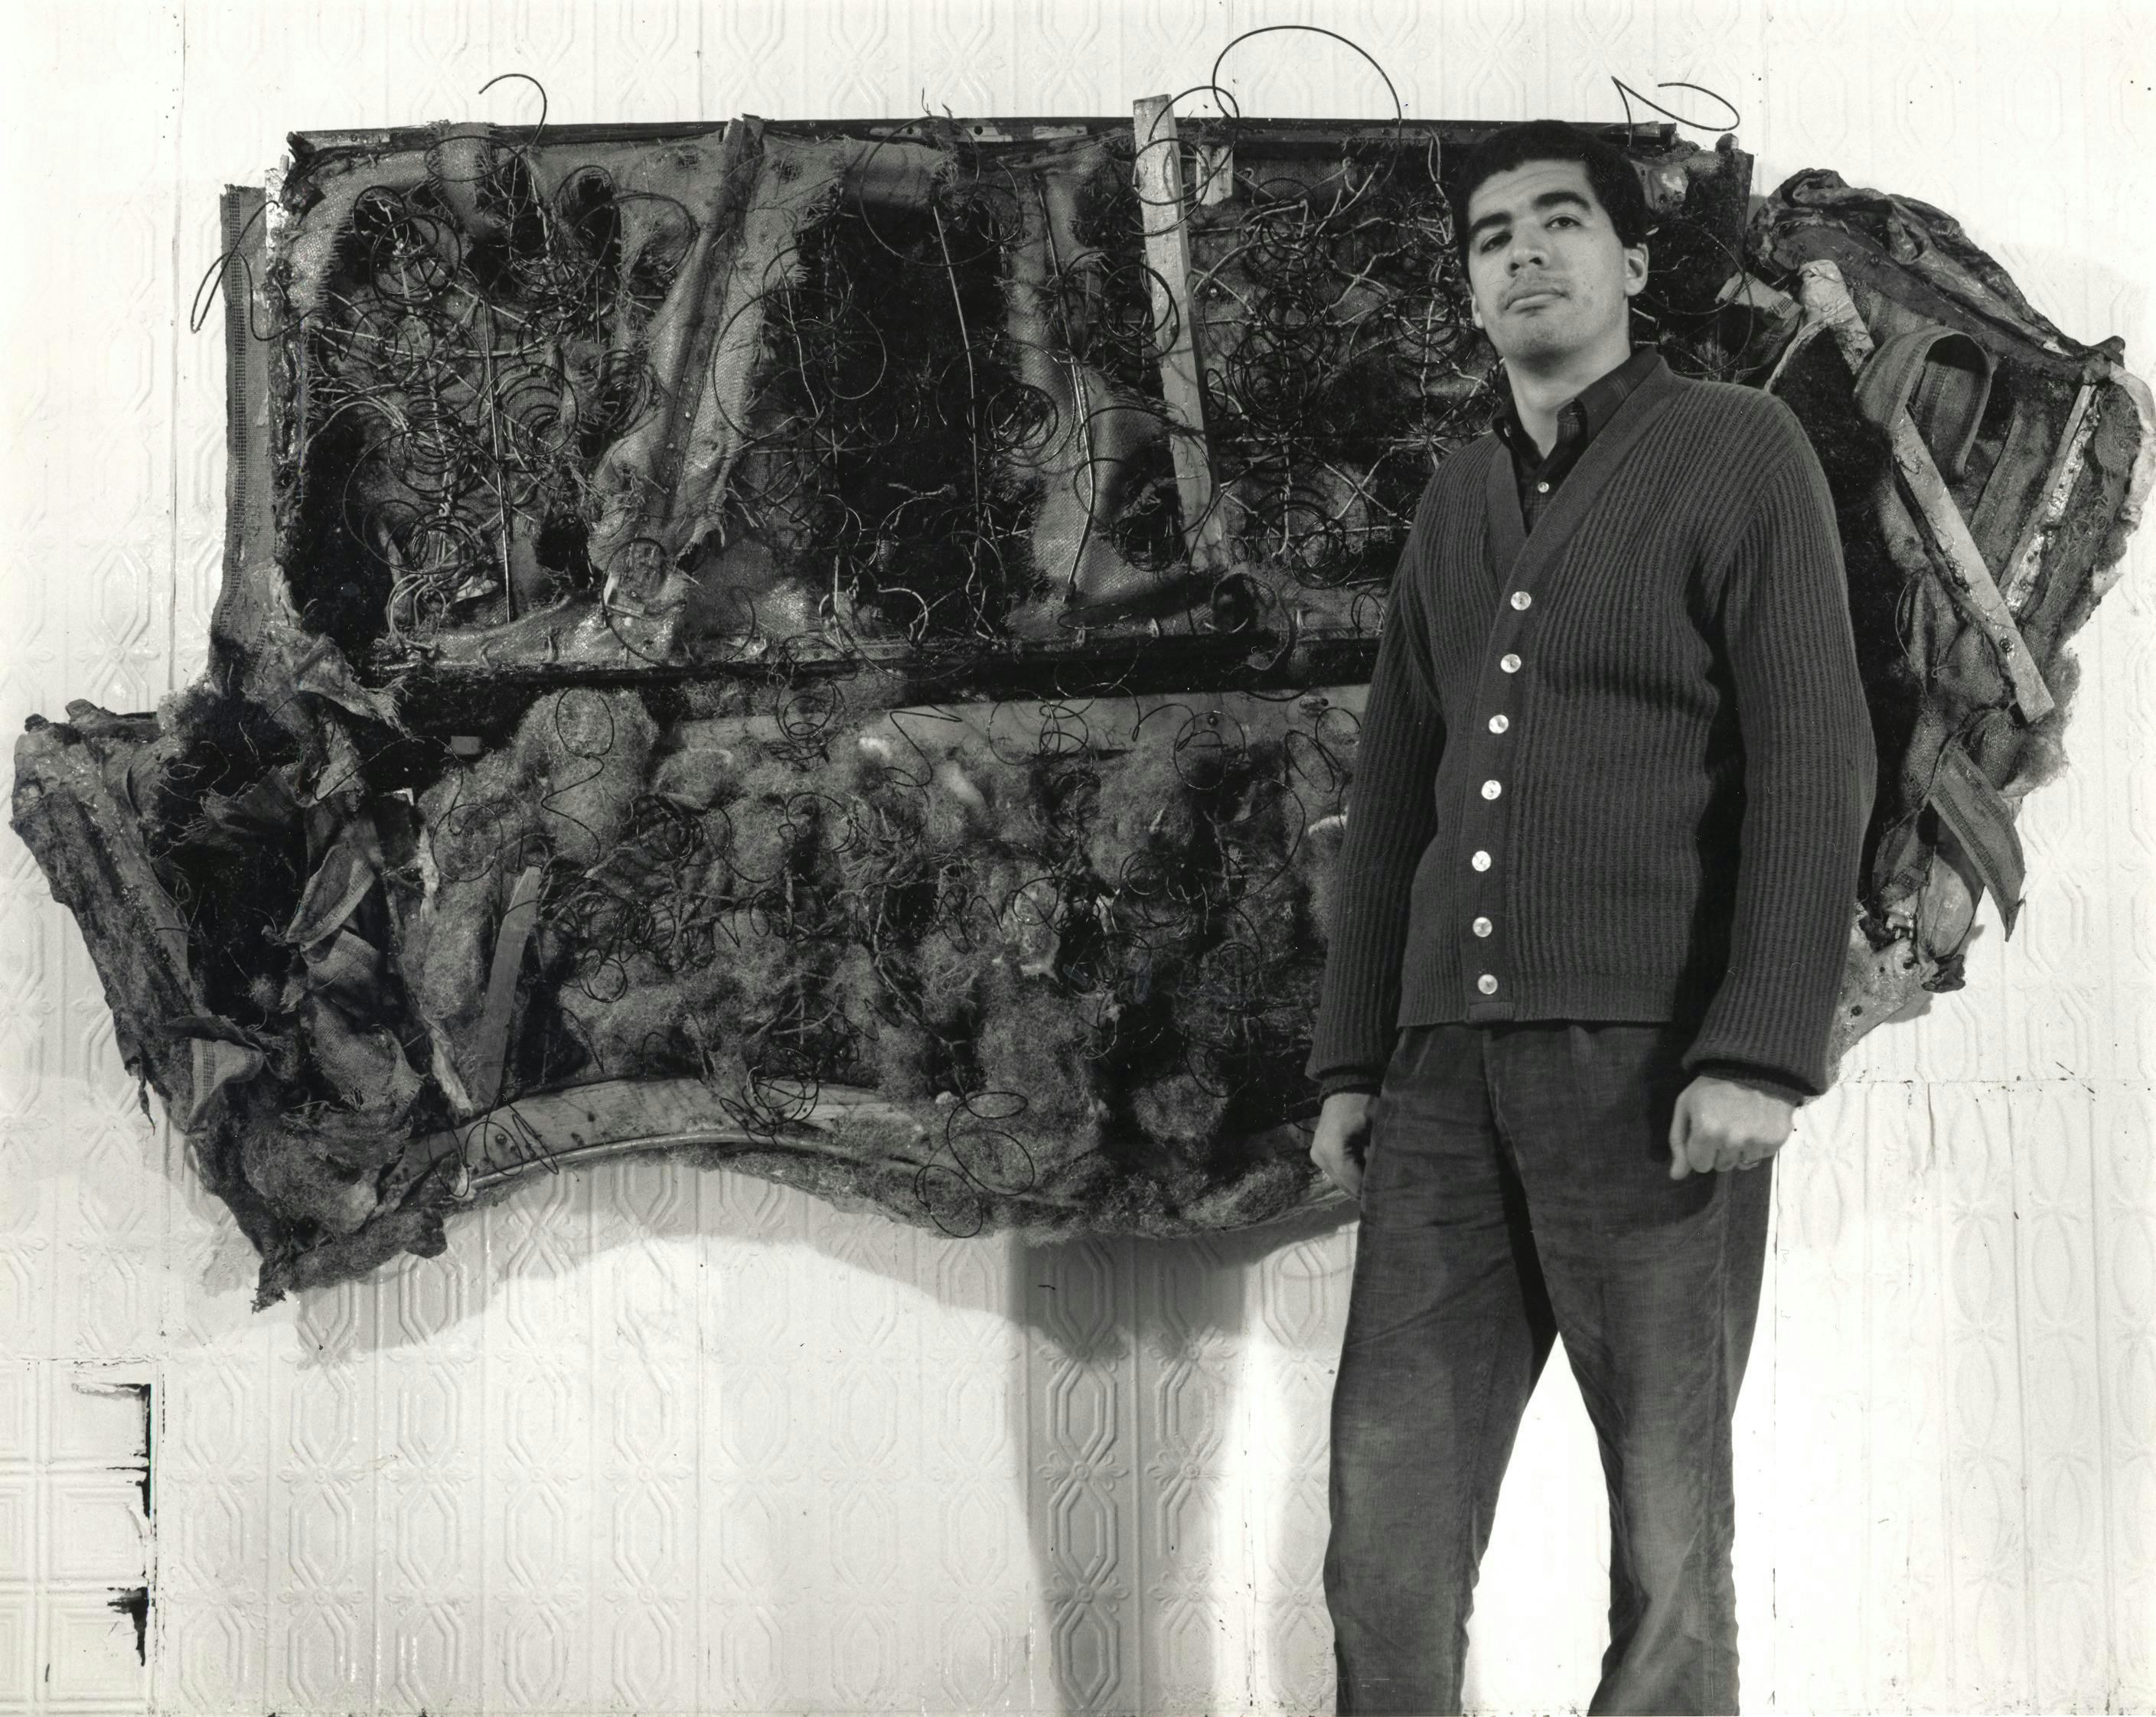 Work by Raphael Montañez Ortiz rendered in black and white. Ortiz pictured in front of their work.